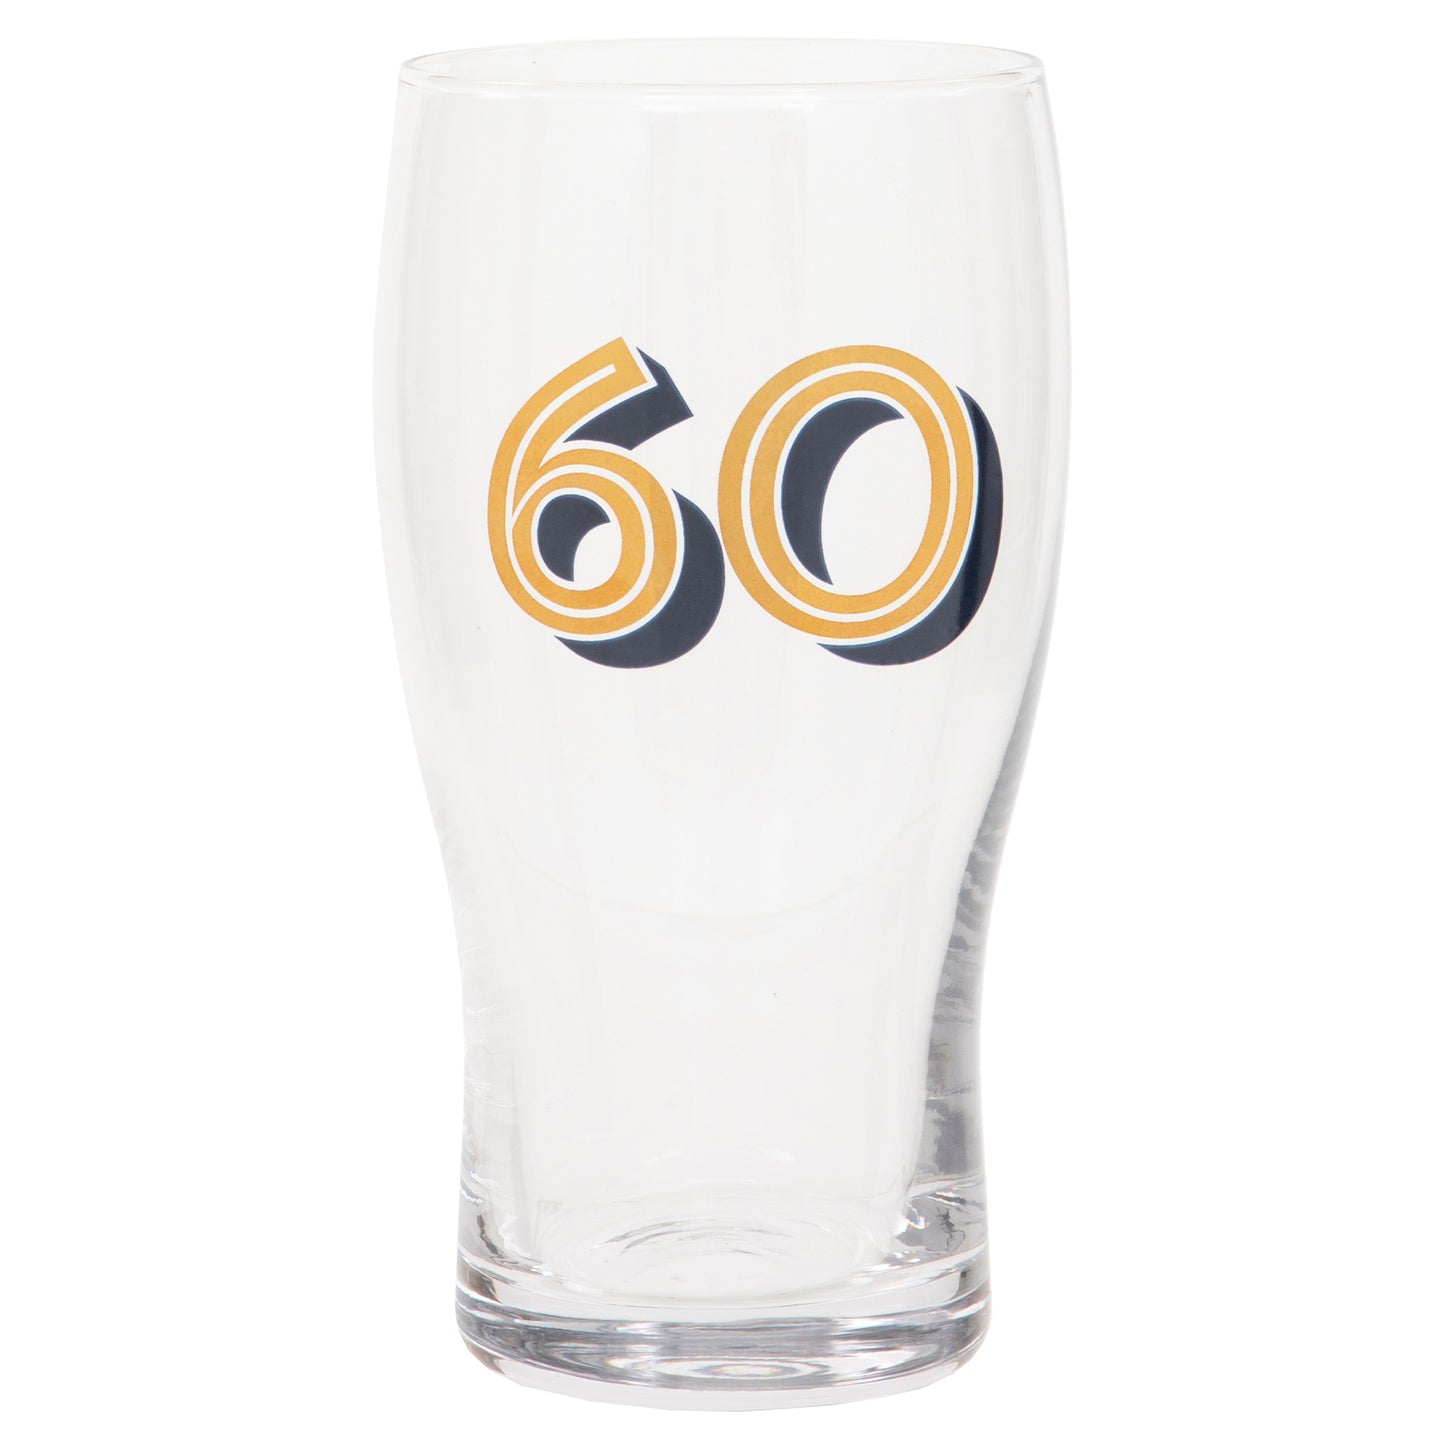 Gold Collection 60th Birthday Beer Glass